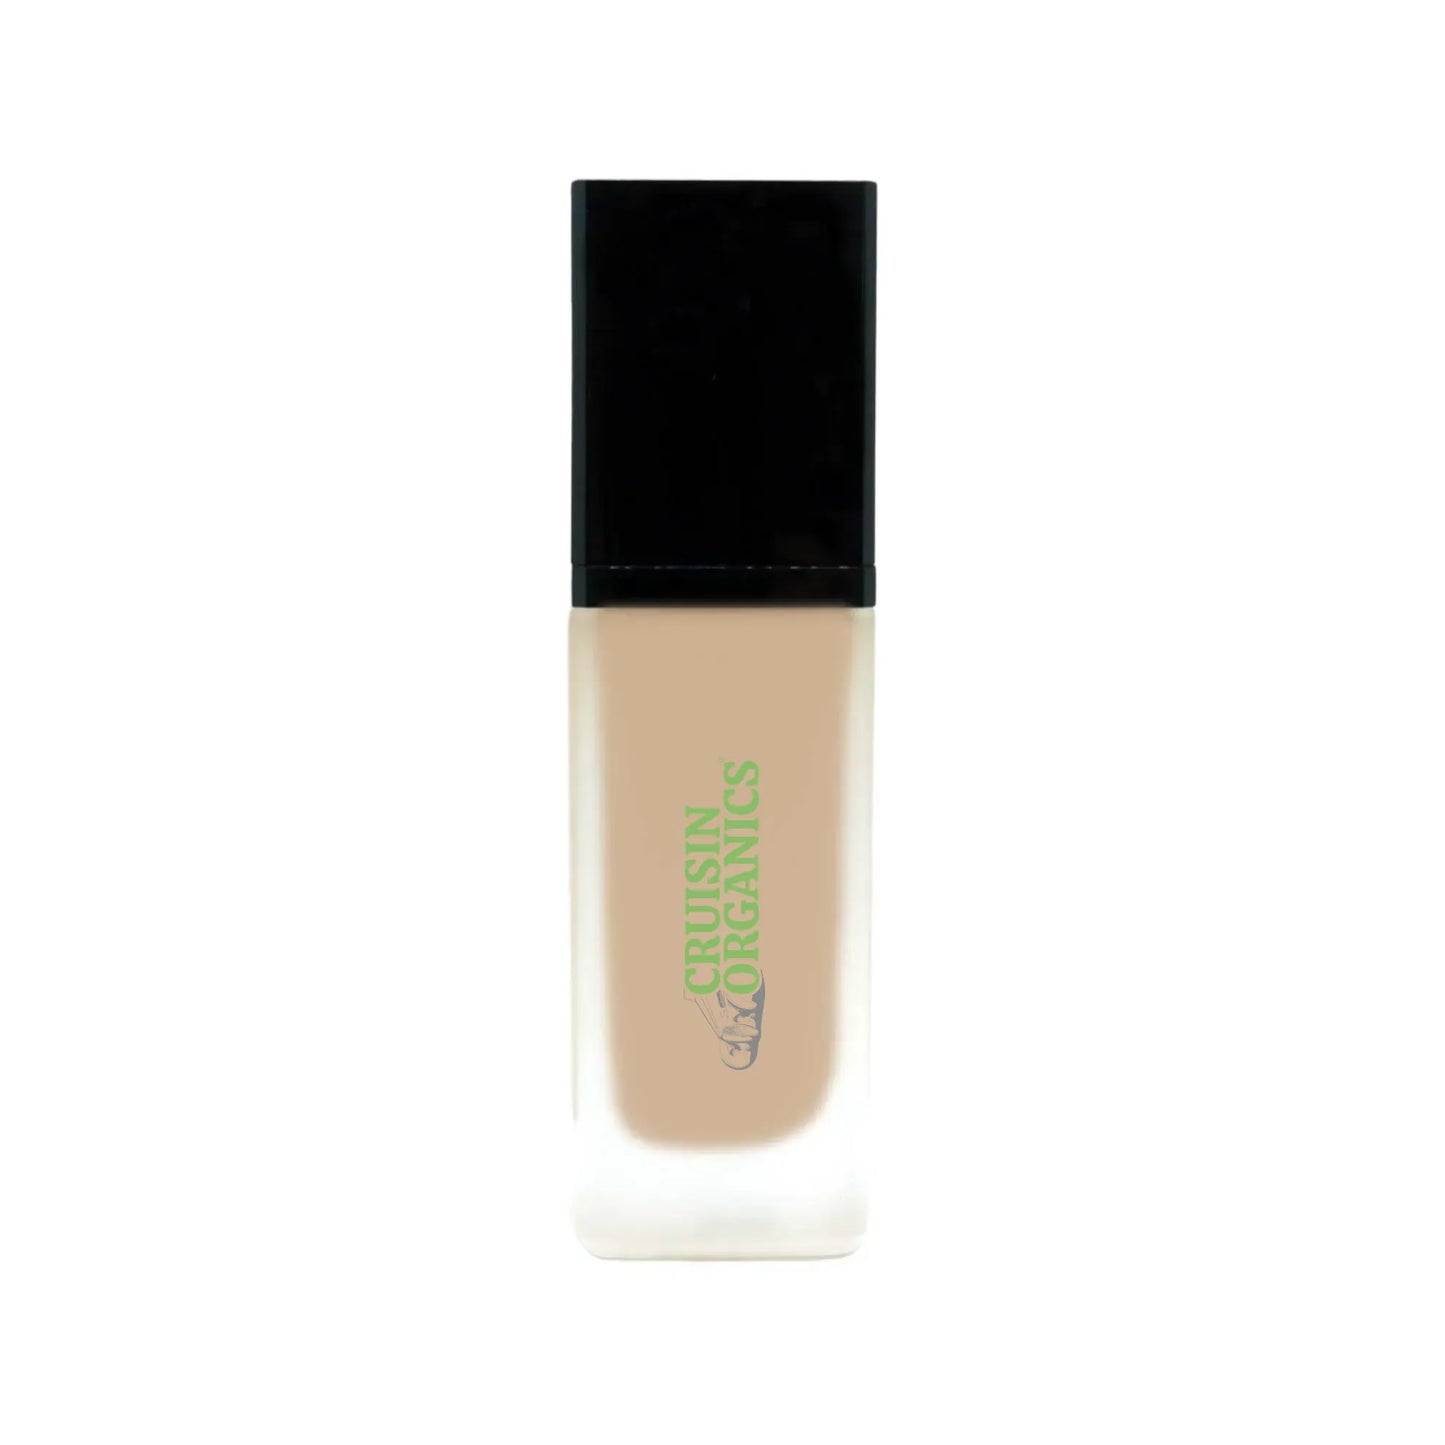 Foundation with SPF - Seashell